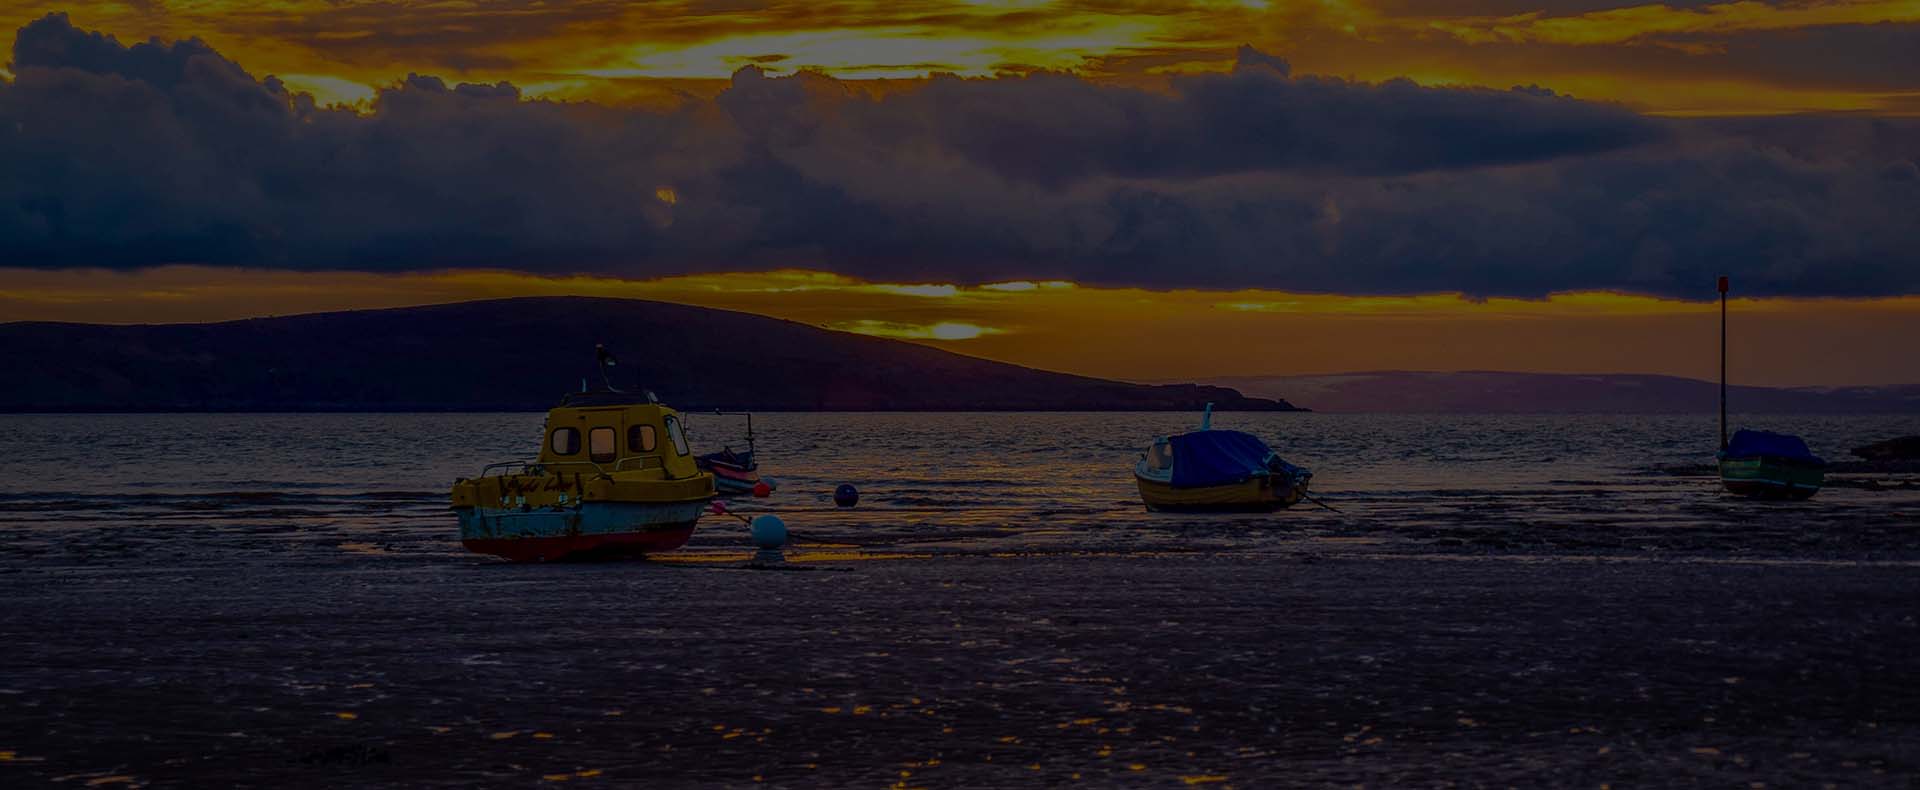 weston super mare bristol channel with boats in sea sunset and mountain in background